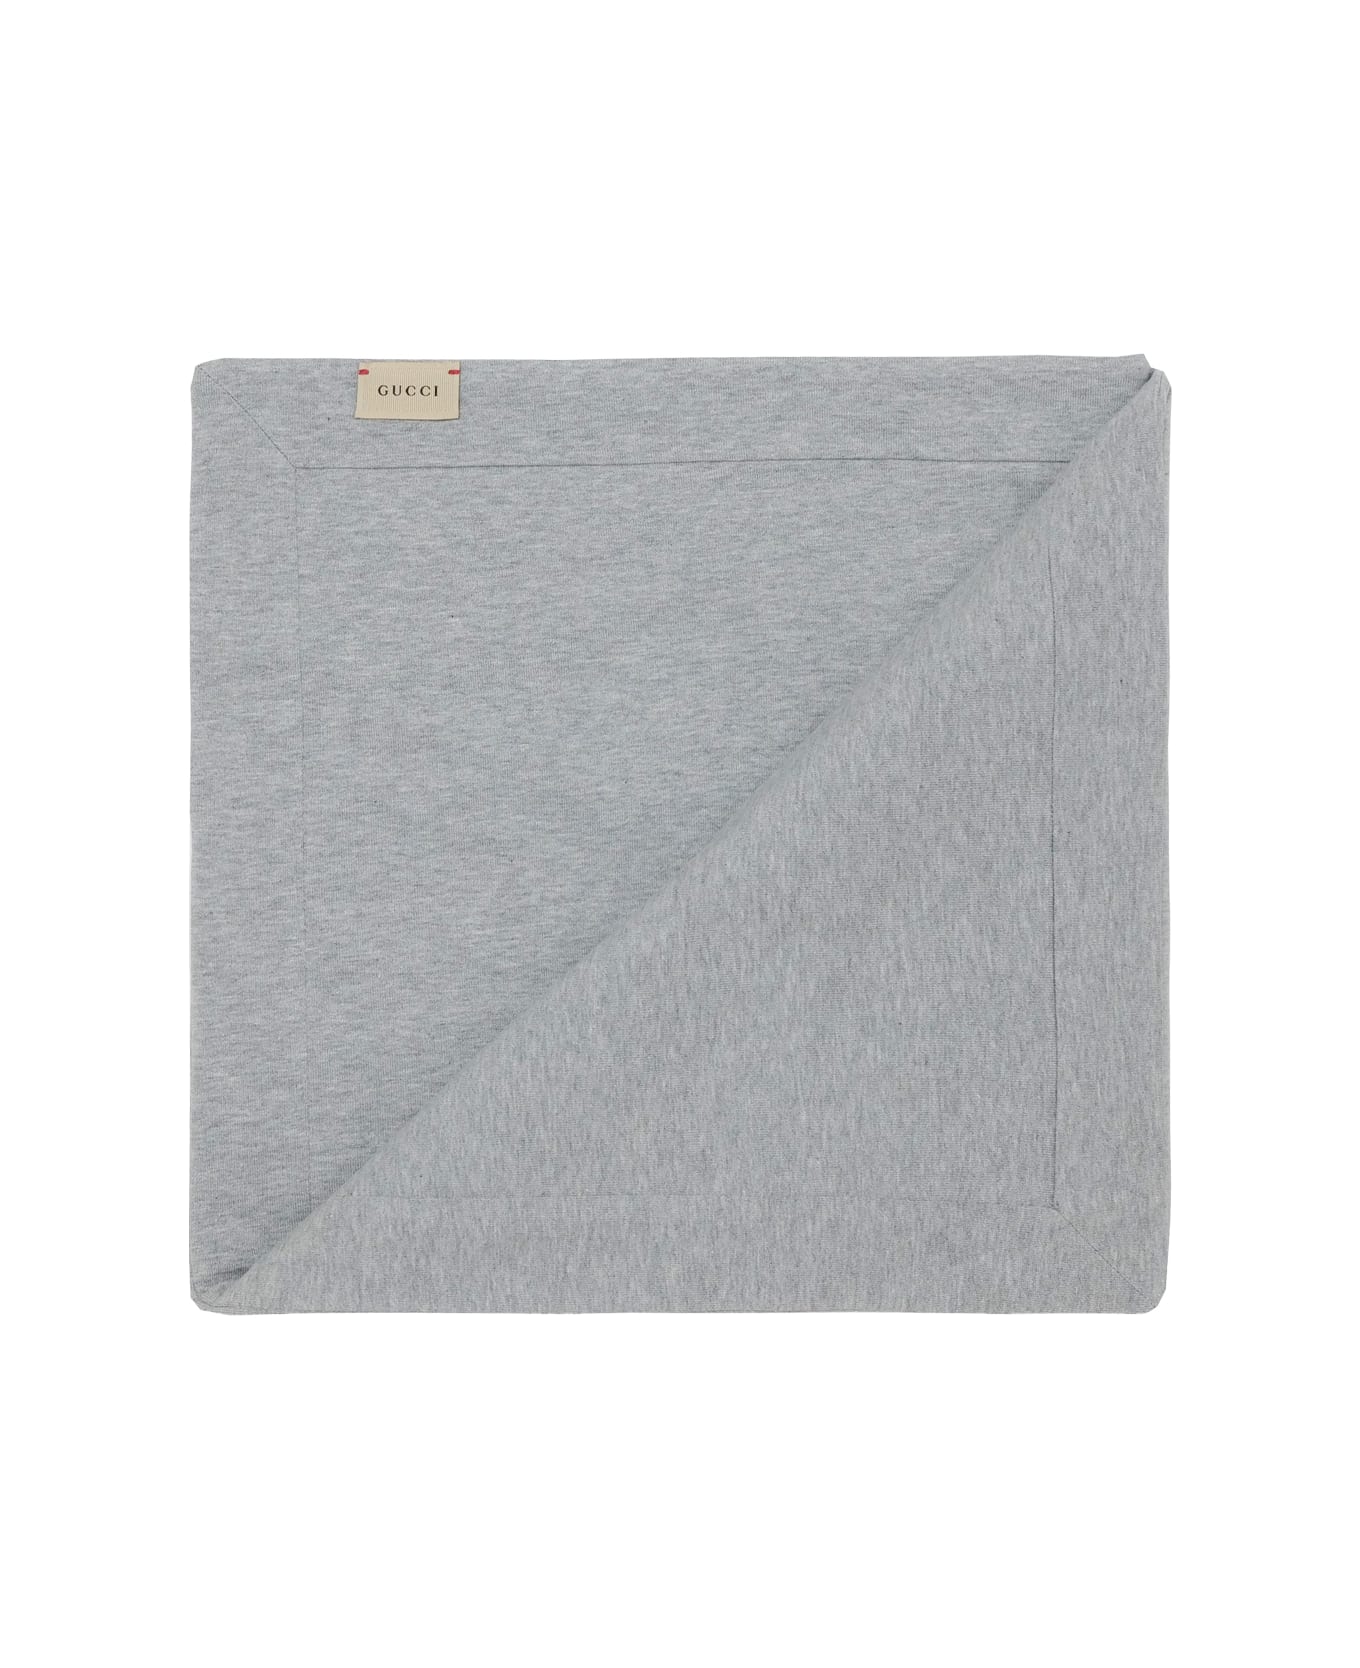 Gucci Baby Blanket - Grey アクセサリー＆ギフト